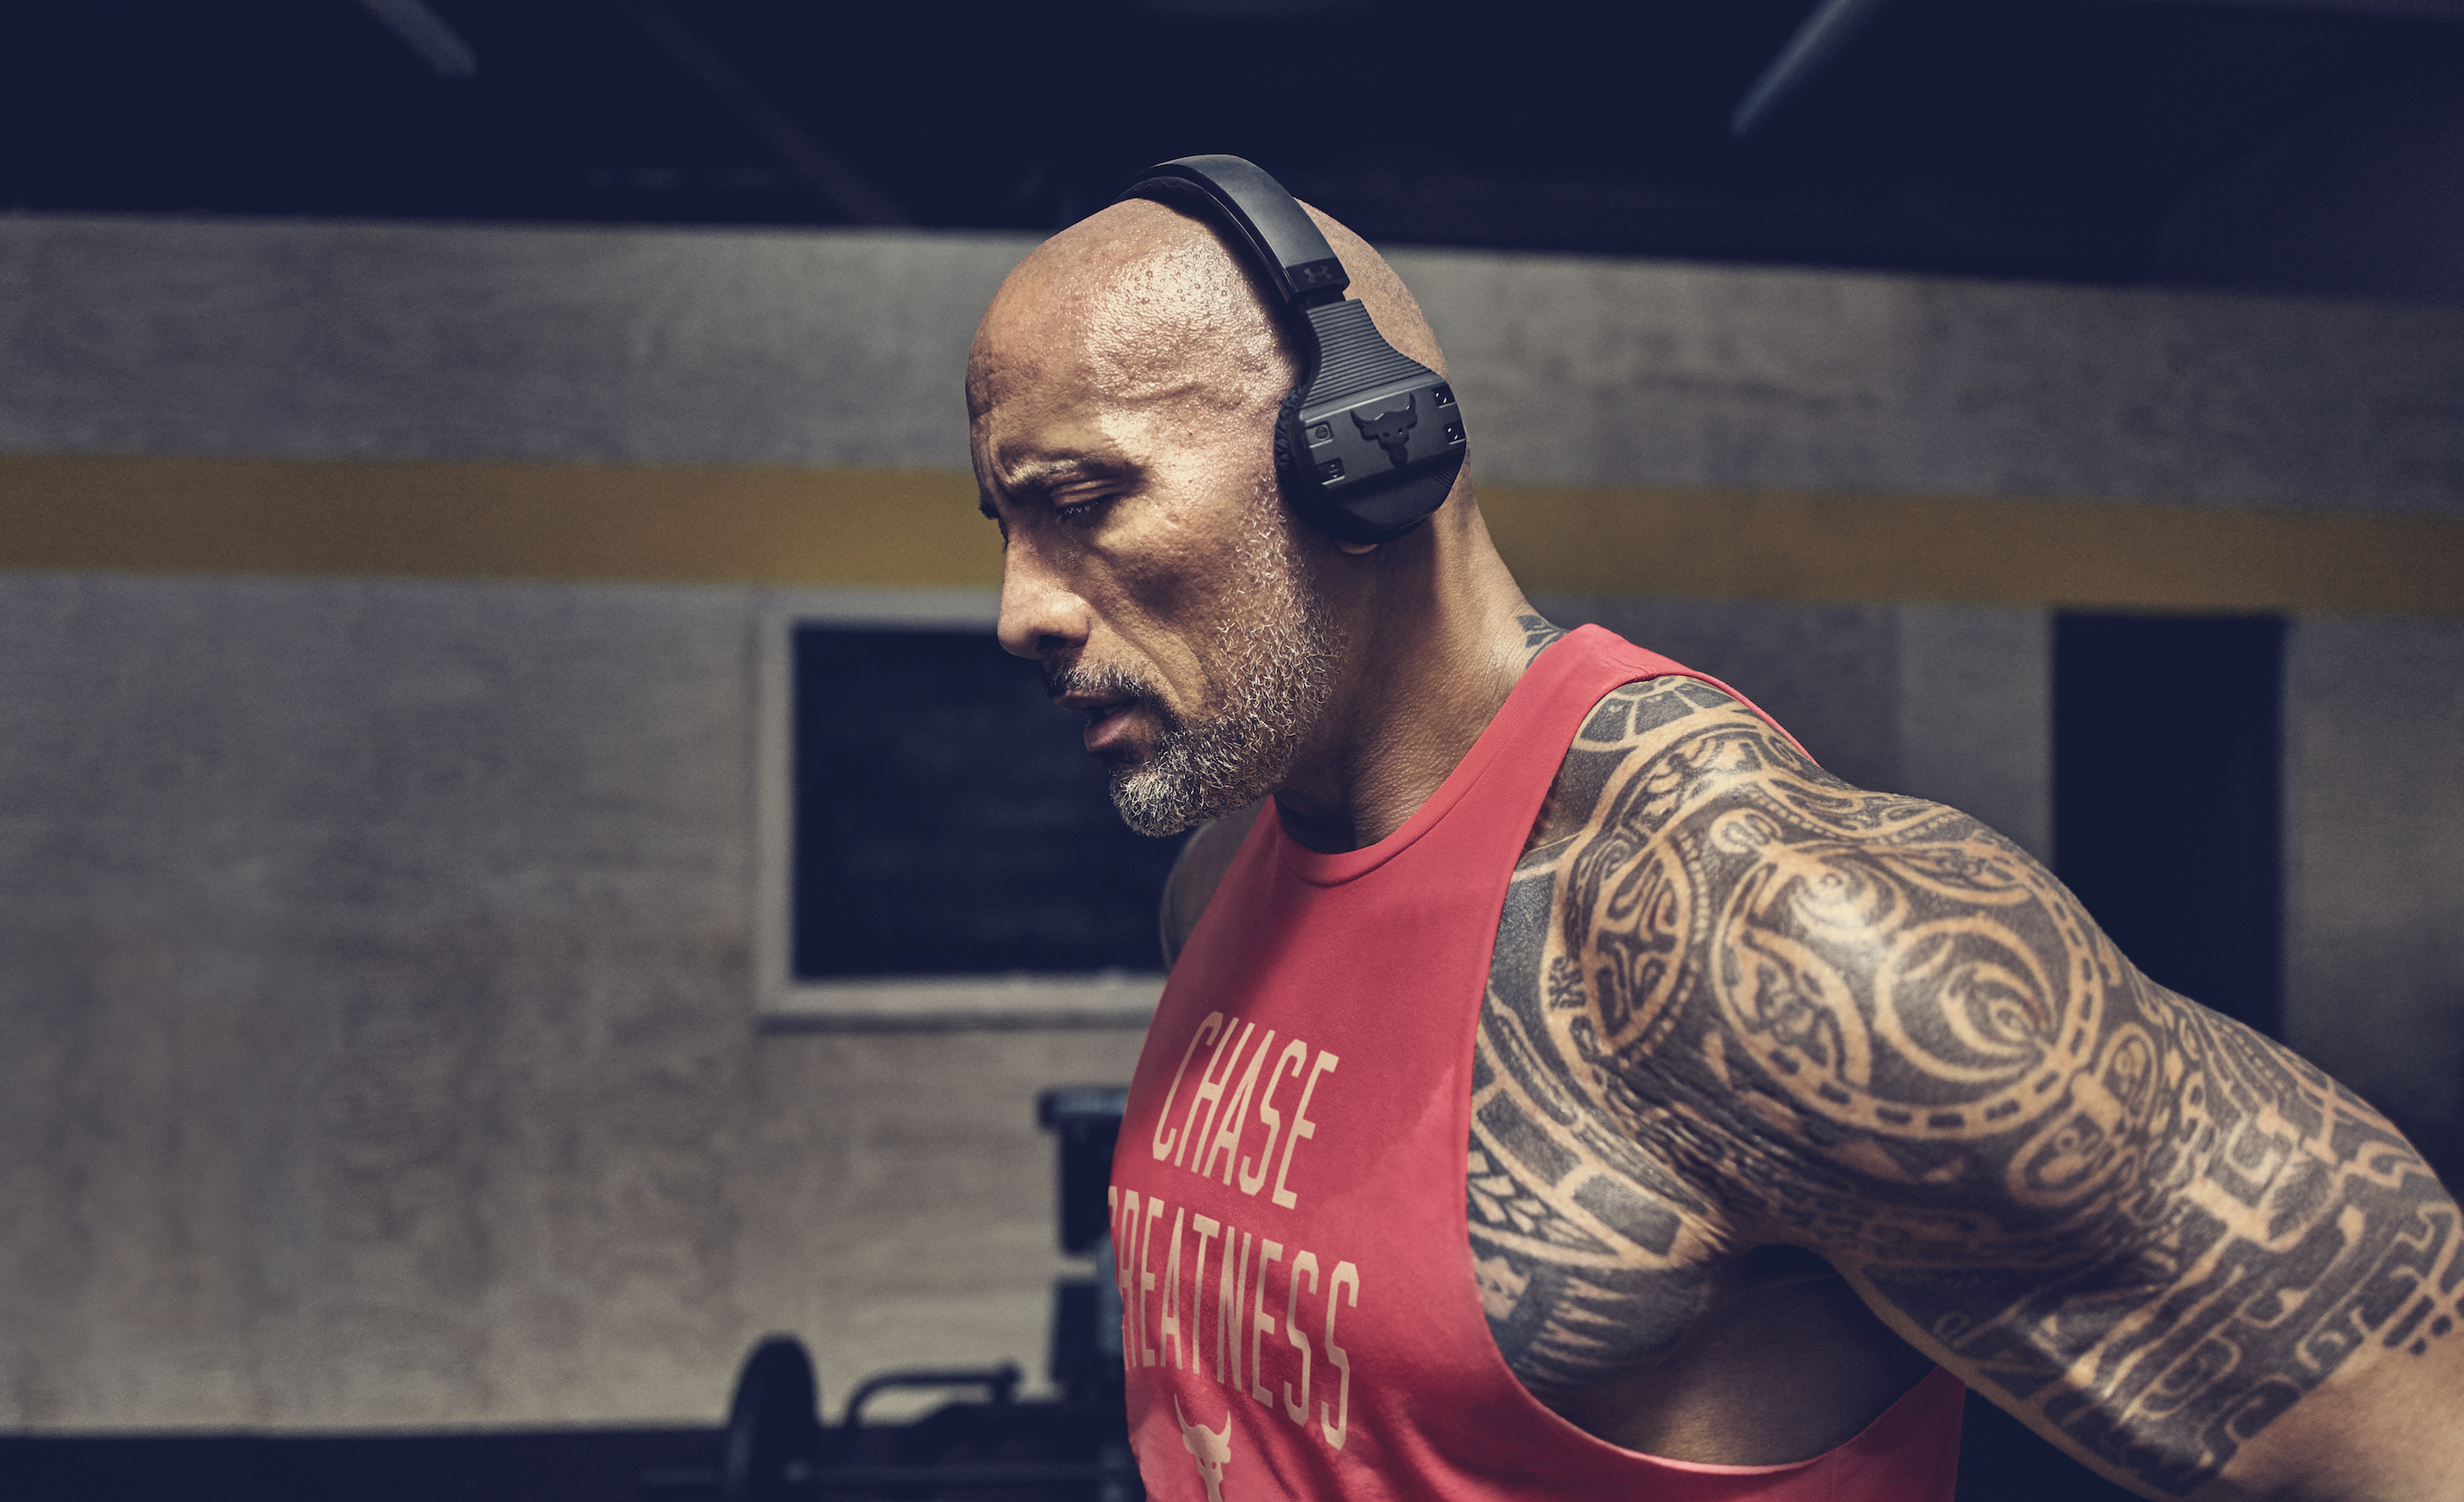 15 Minute Dwayne Johnson Workout Gear for Gym